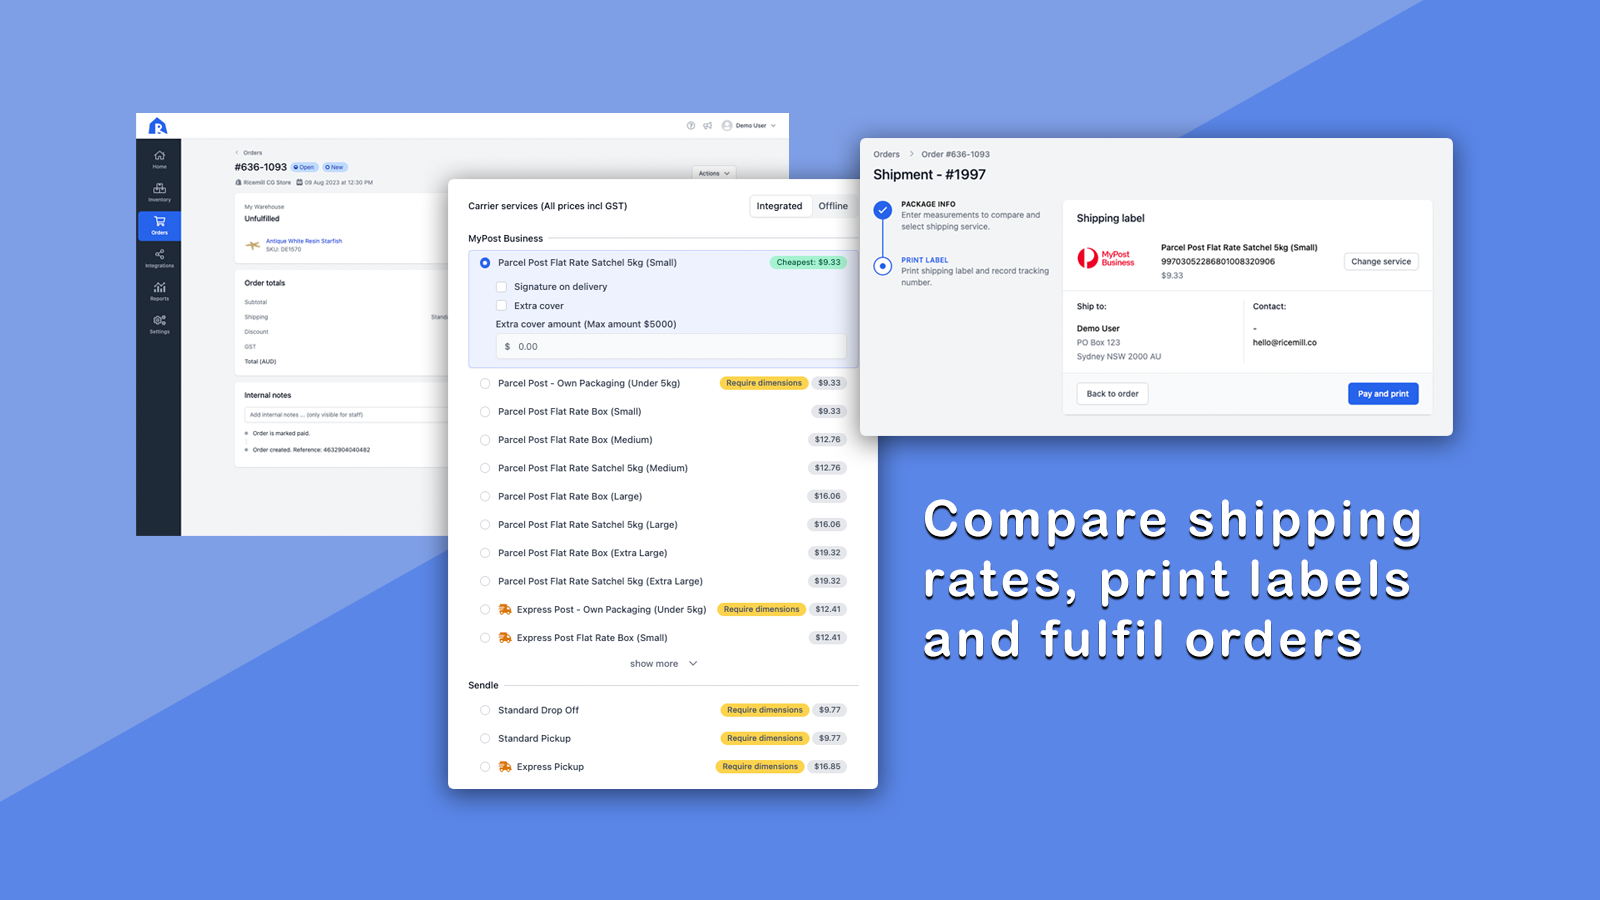 Compare shipping rates, print labels and fulfil orders